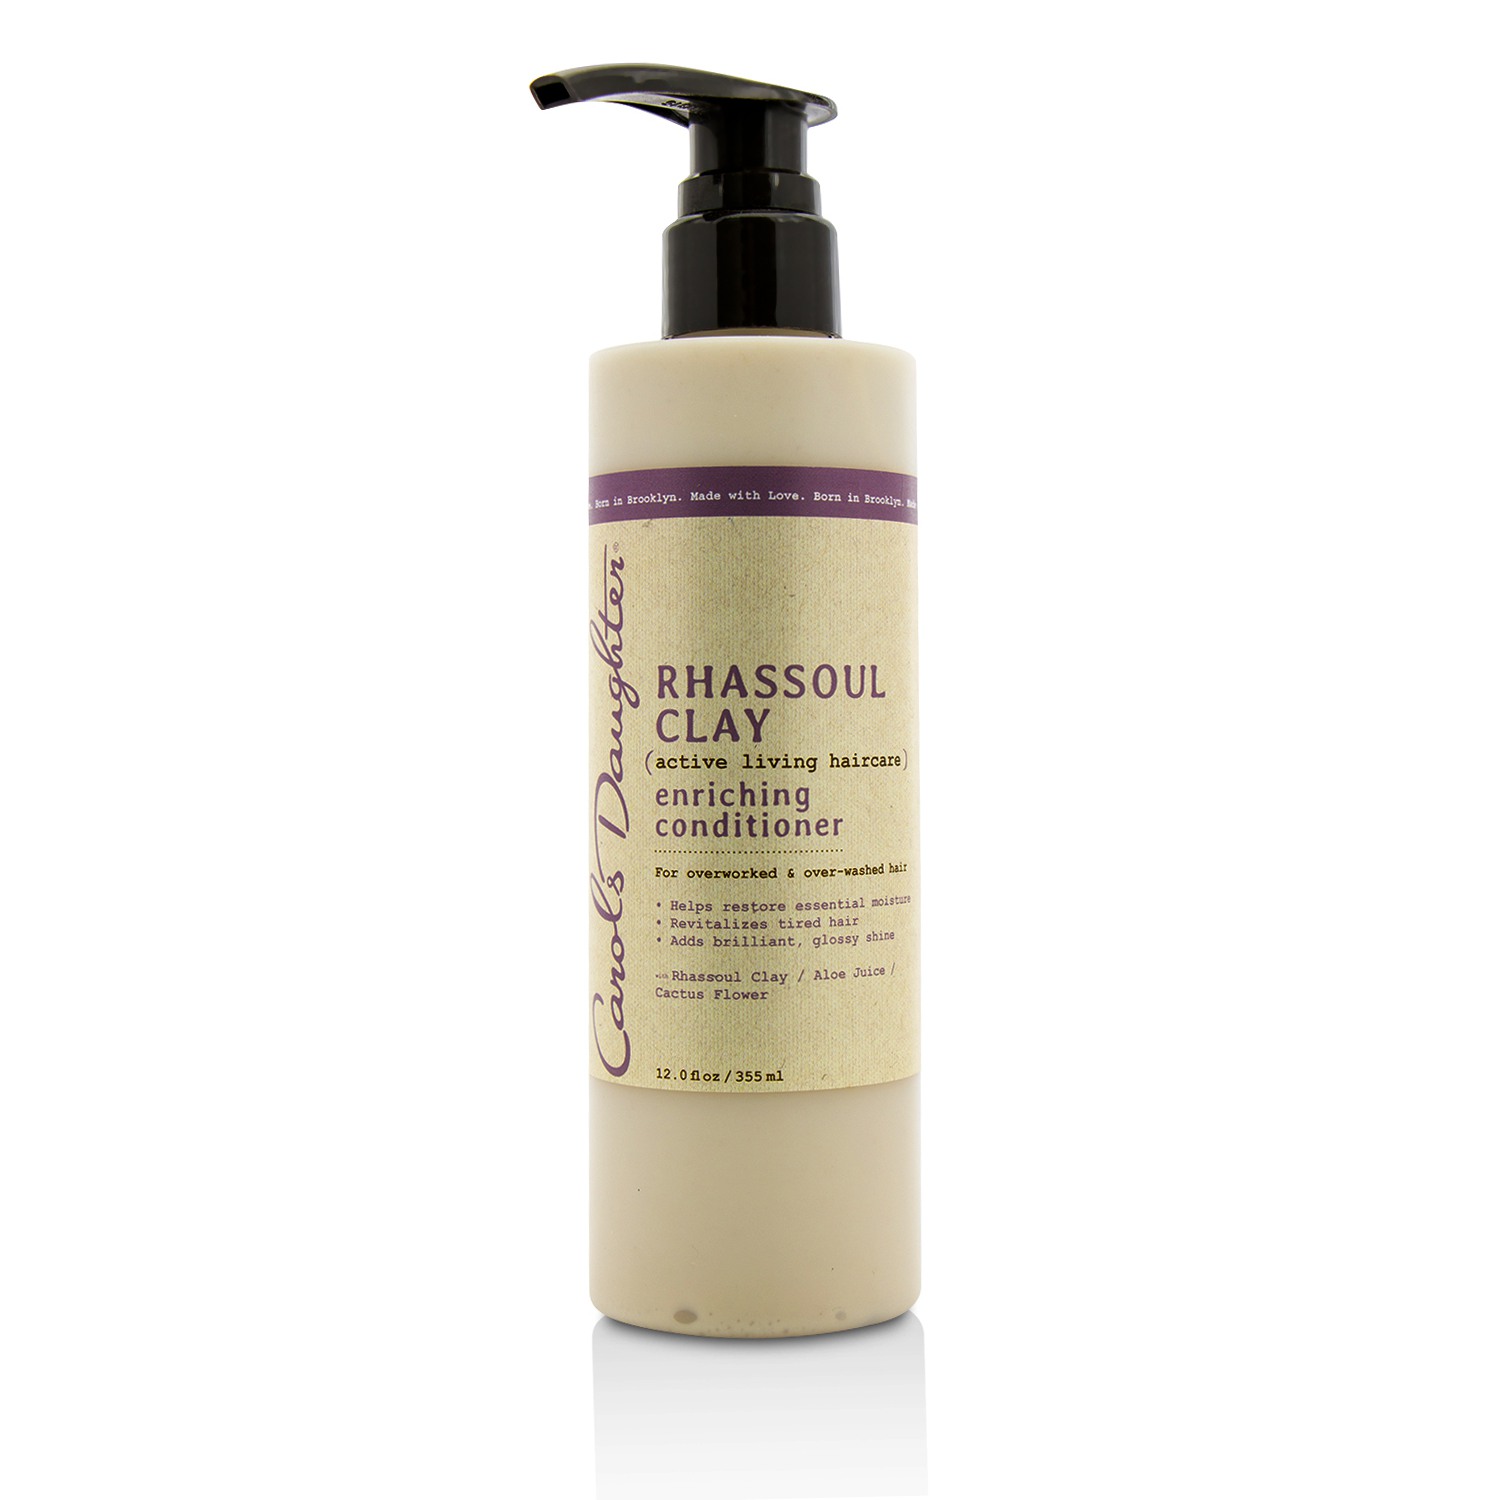 Rhassoul Clay Active Living Haircare Enriching Conditioner (For Overworked & Over-washed Hair) Carols Daughter Image